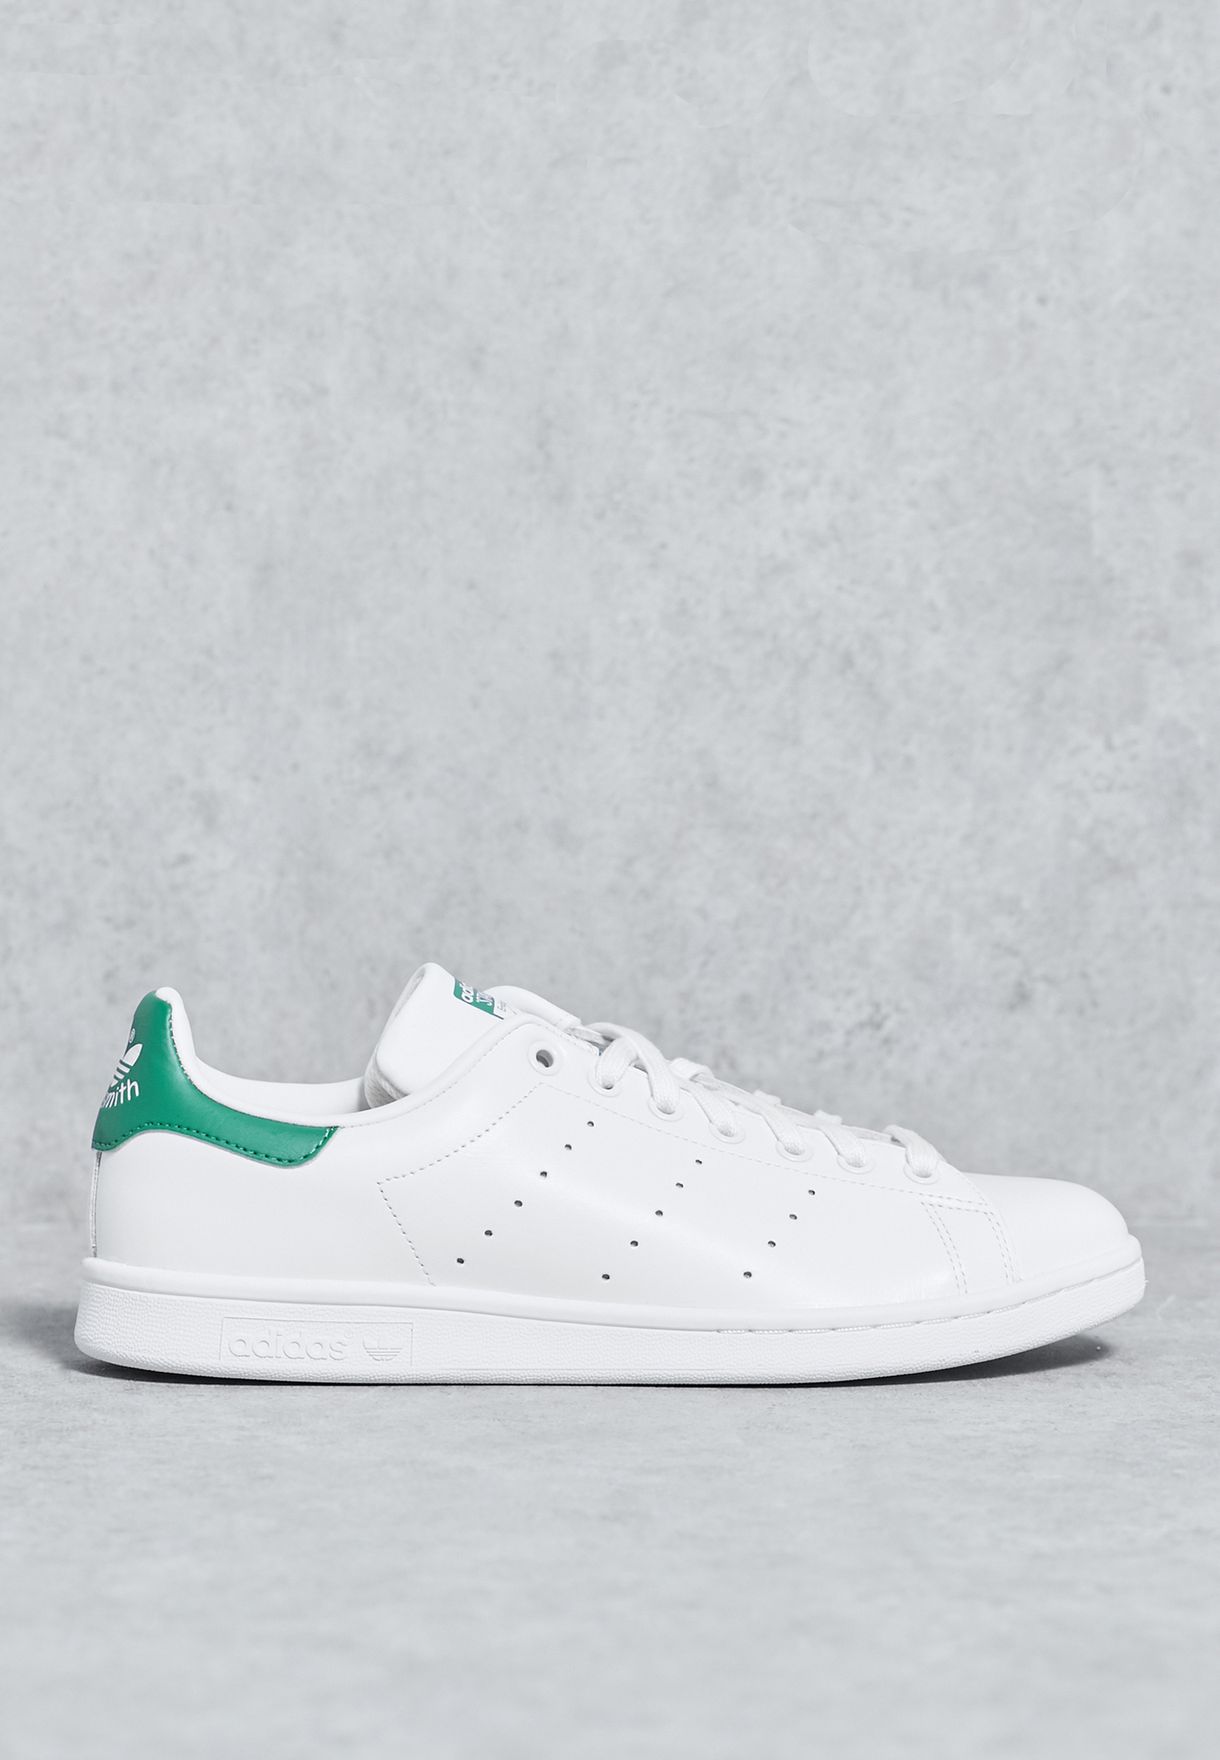 stan smith shoes price